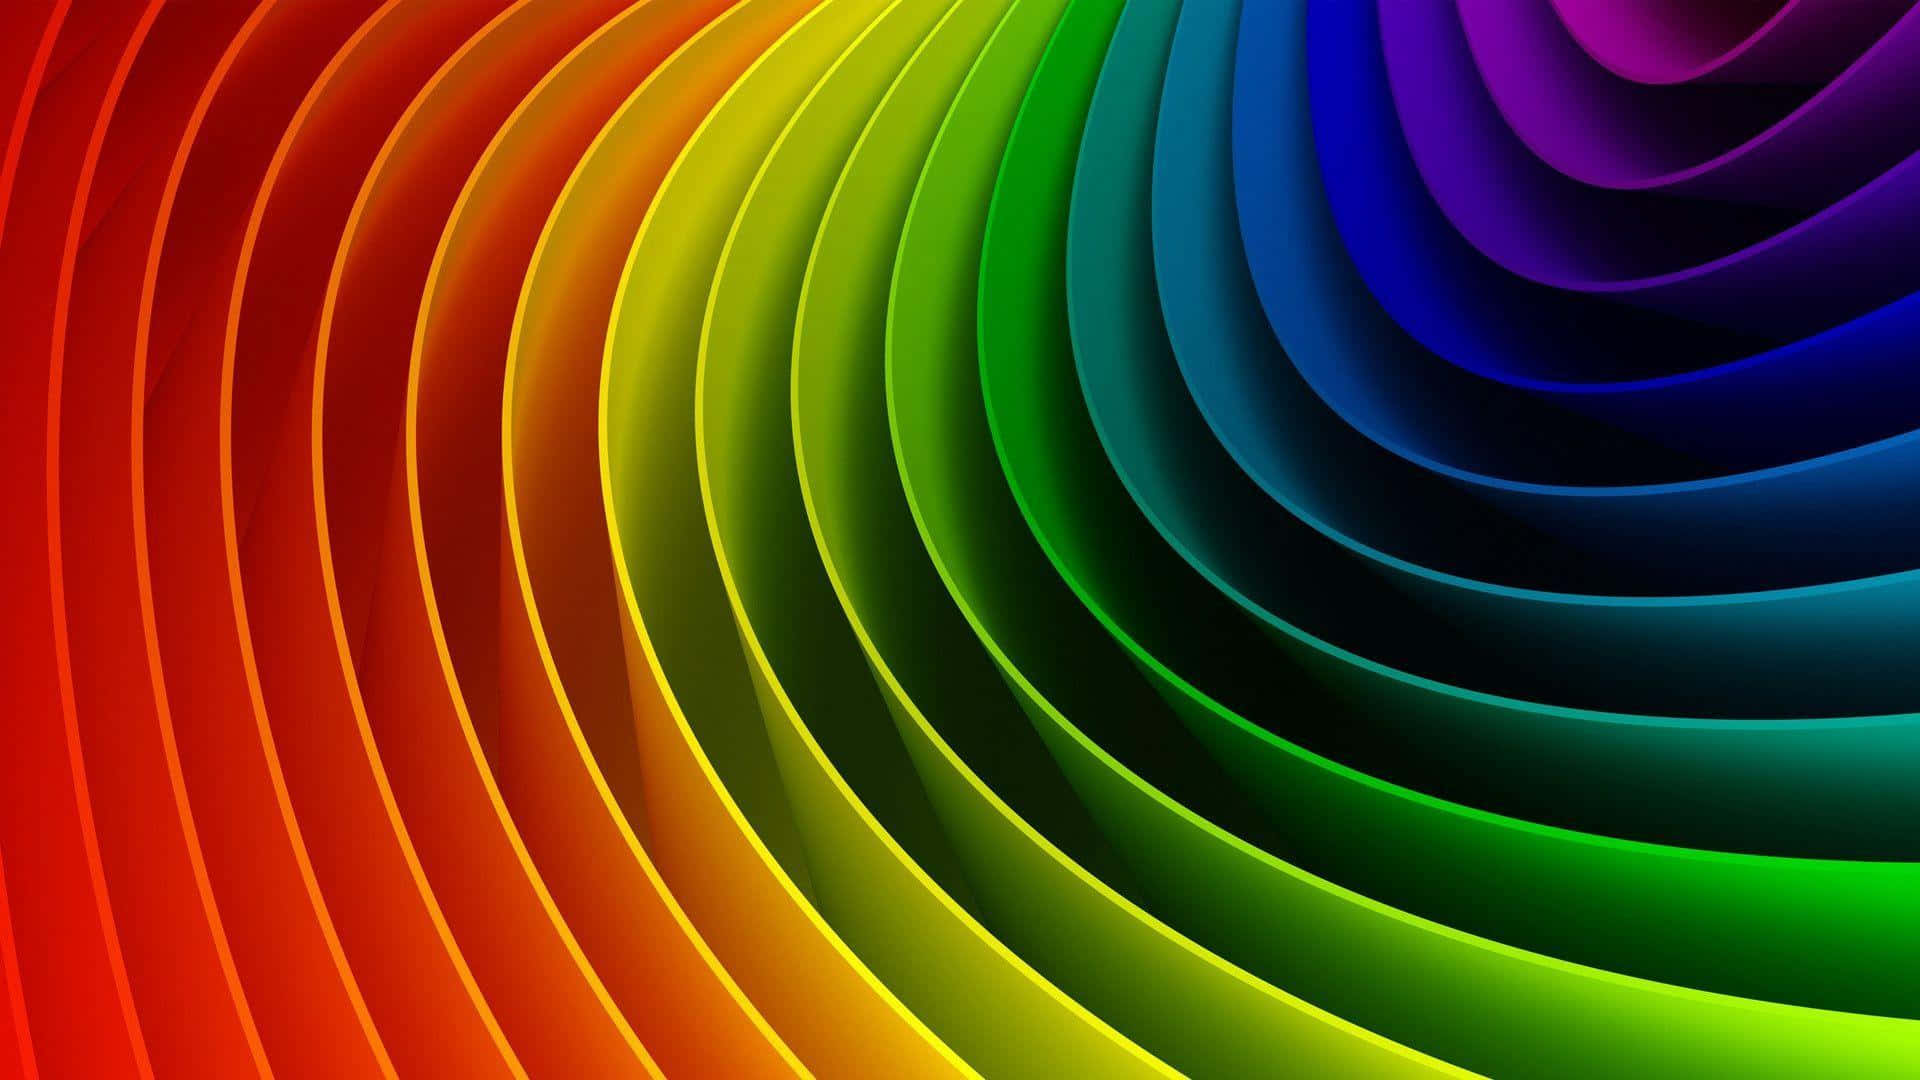 Vibrant Twists Of Colour: A Rainbow Spiral Journey Background